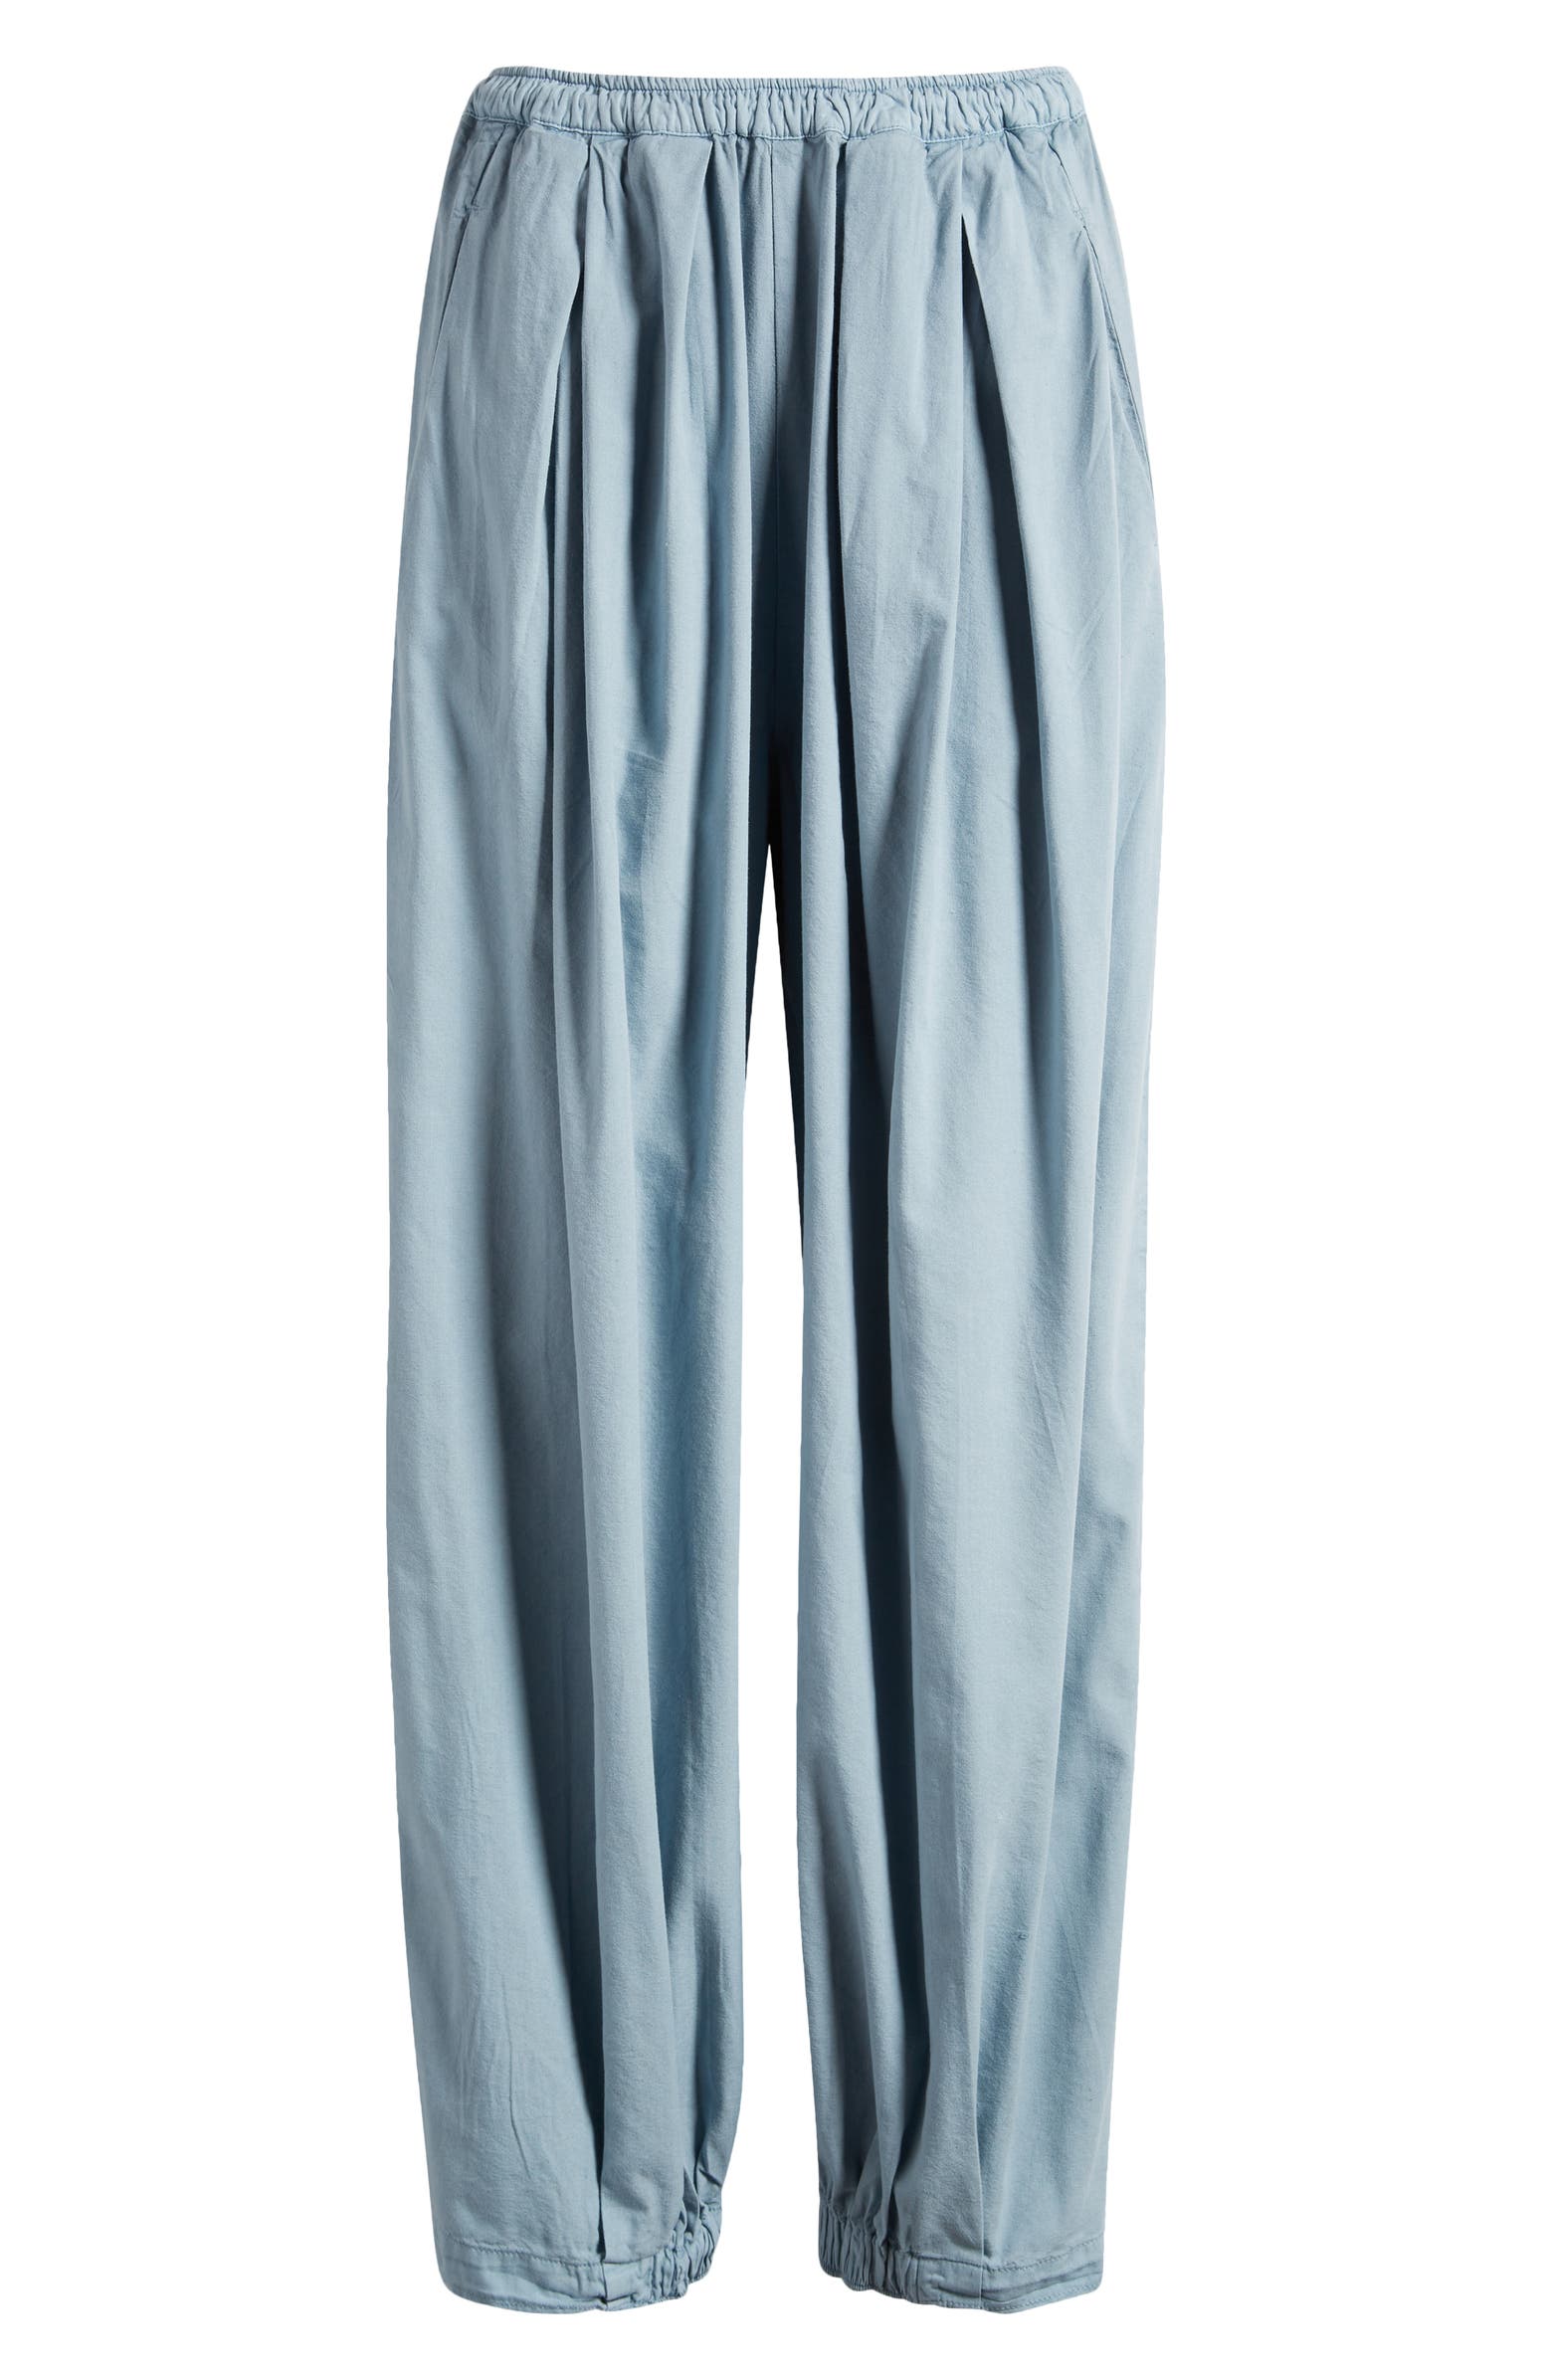 Free People To the Sky Parachute Pants | Nordstrom